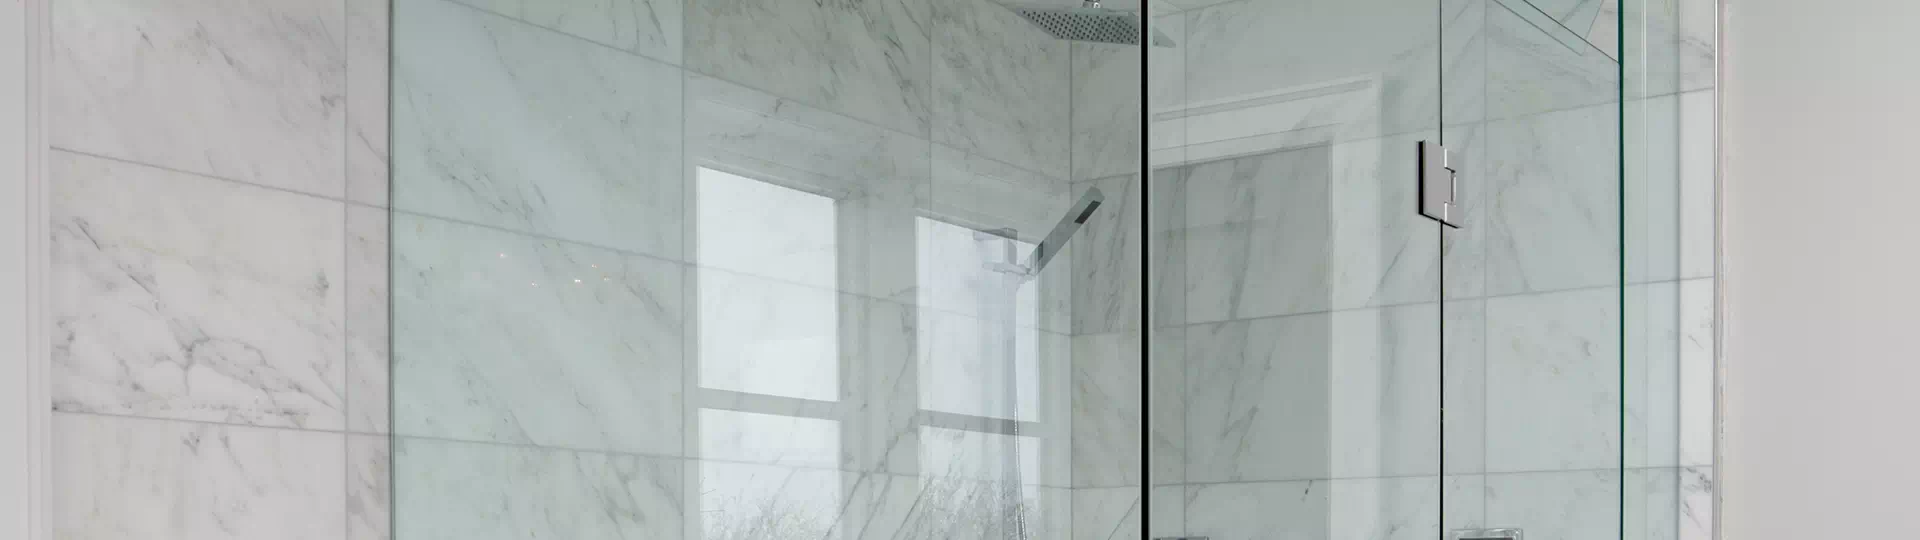 How To Clean A Marble Shower Simple Green, How To Clean Marble Tiles In Shower